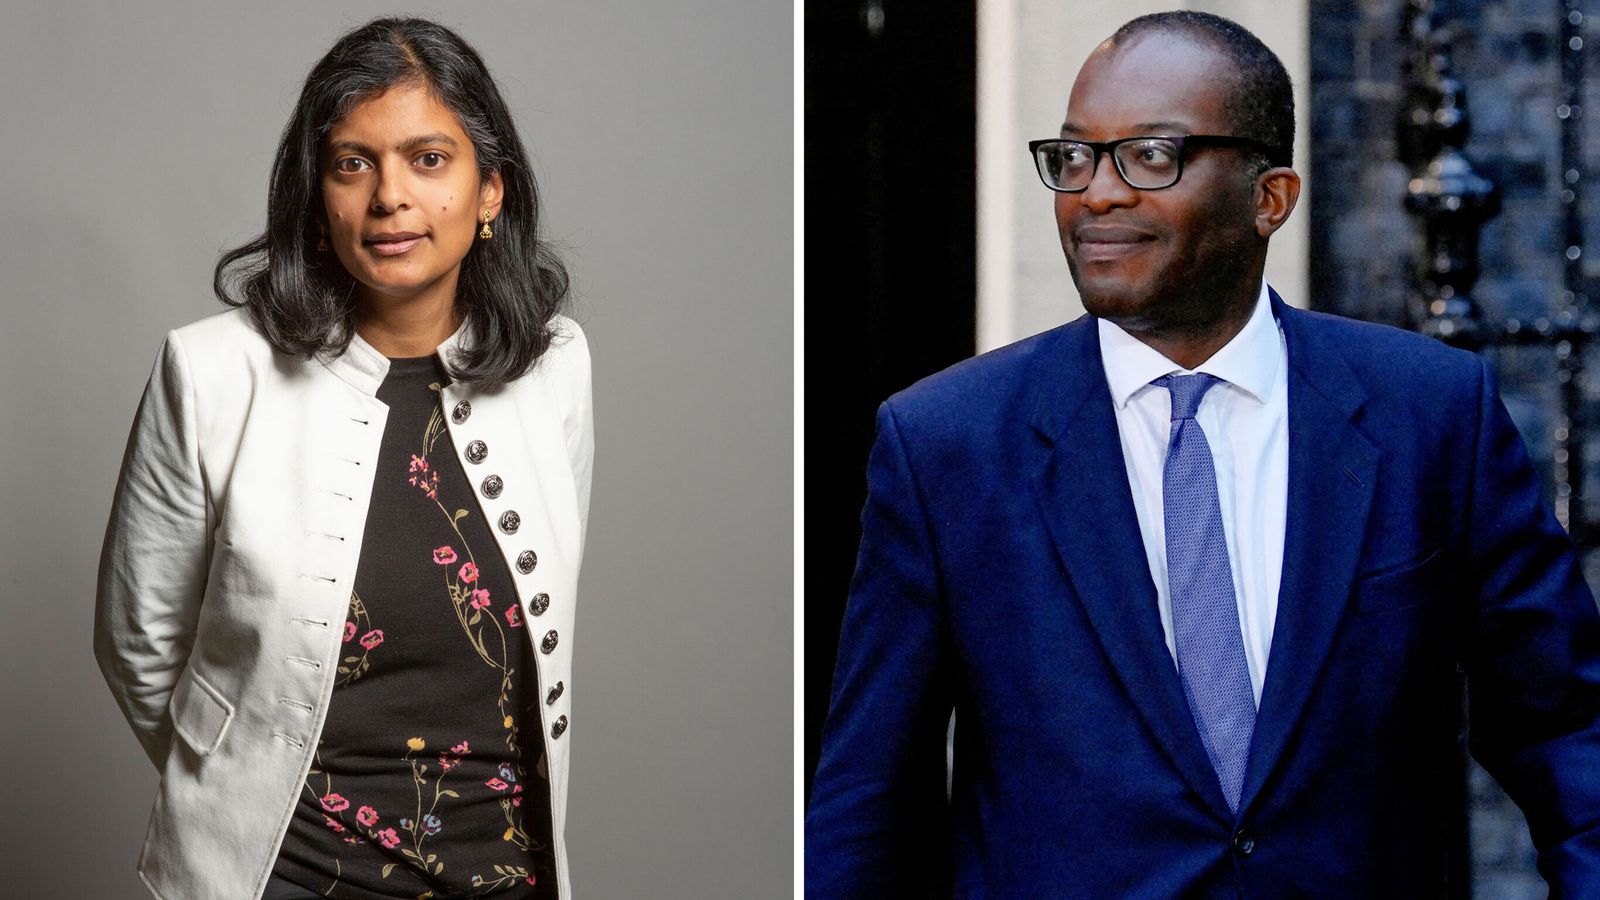 Labour MP Rupa Huq suspended and apologises after calling Chancellor Kwasi Kwarteng 'superficially' black